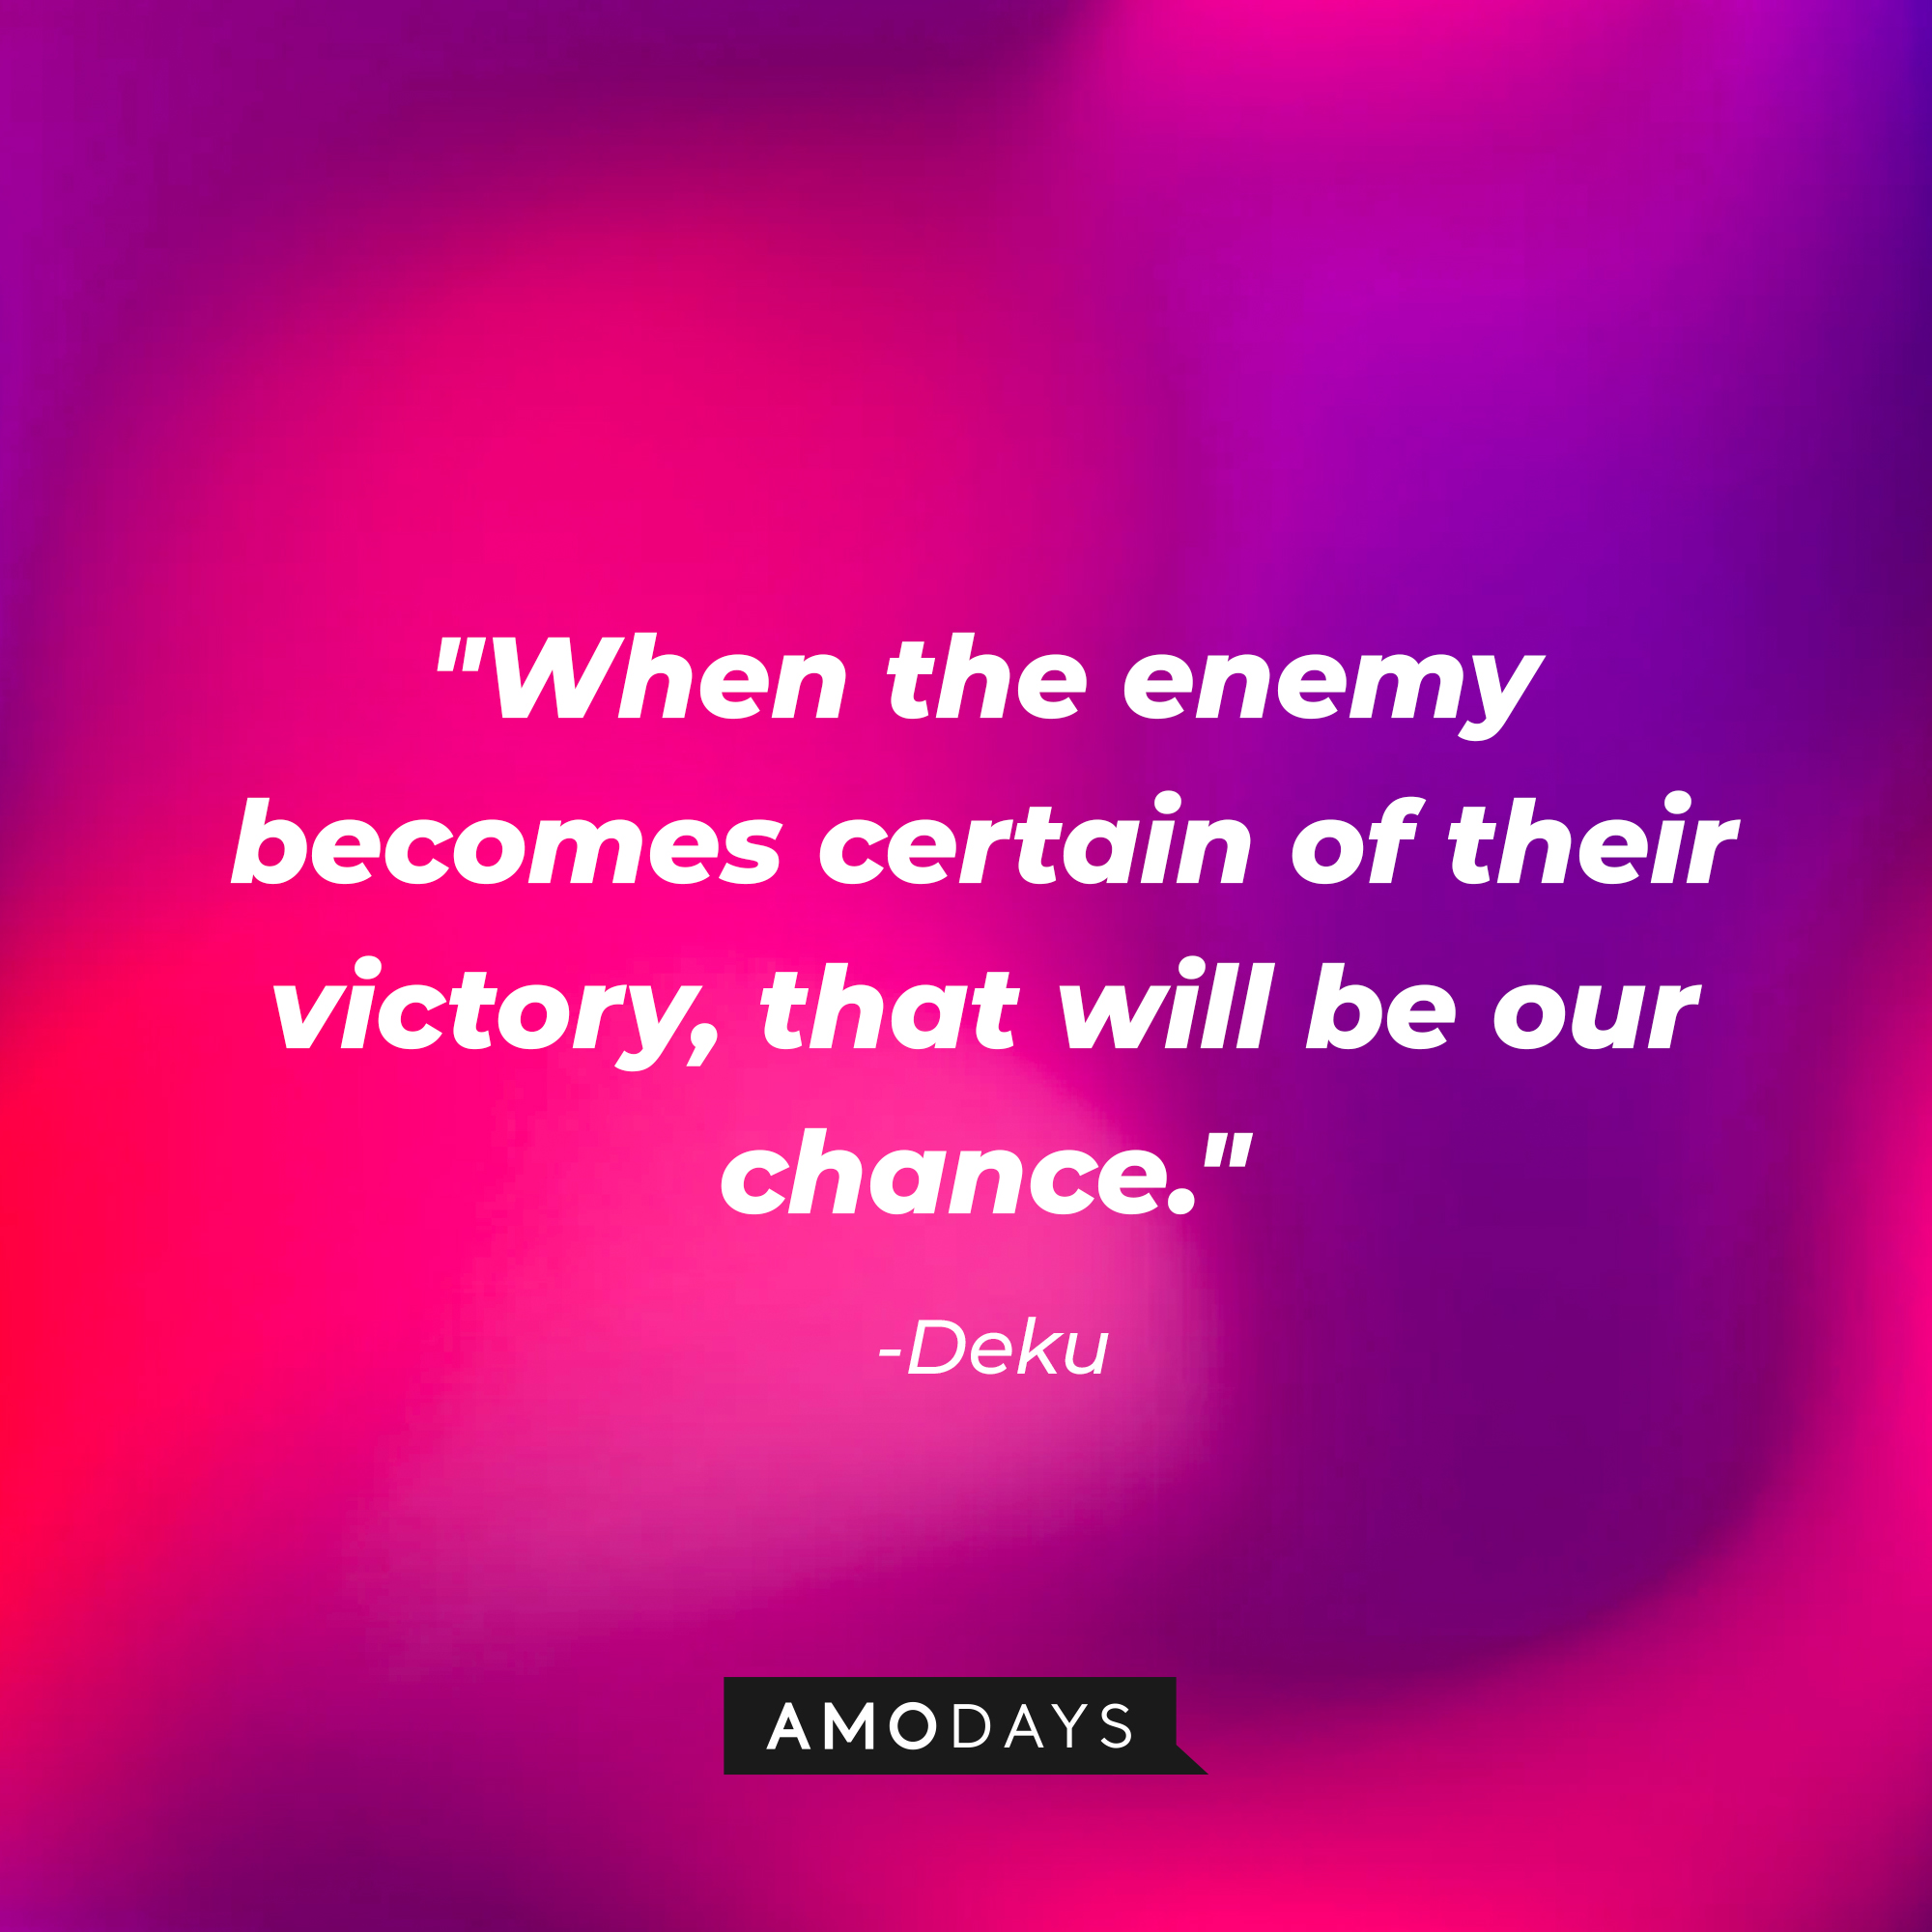 Deku's quote: "When the enemy becomes certain of their victory, that will be our chance." | Source: AmoDays